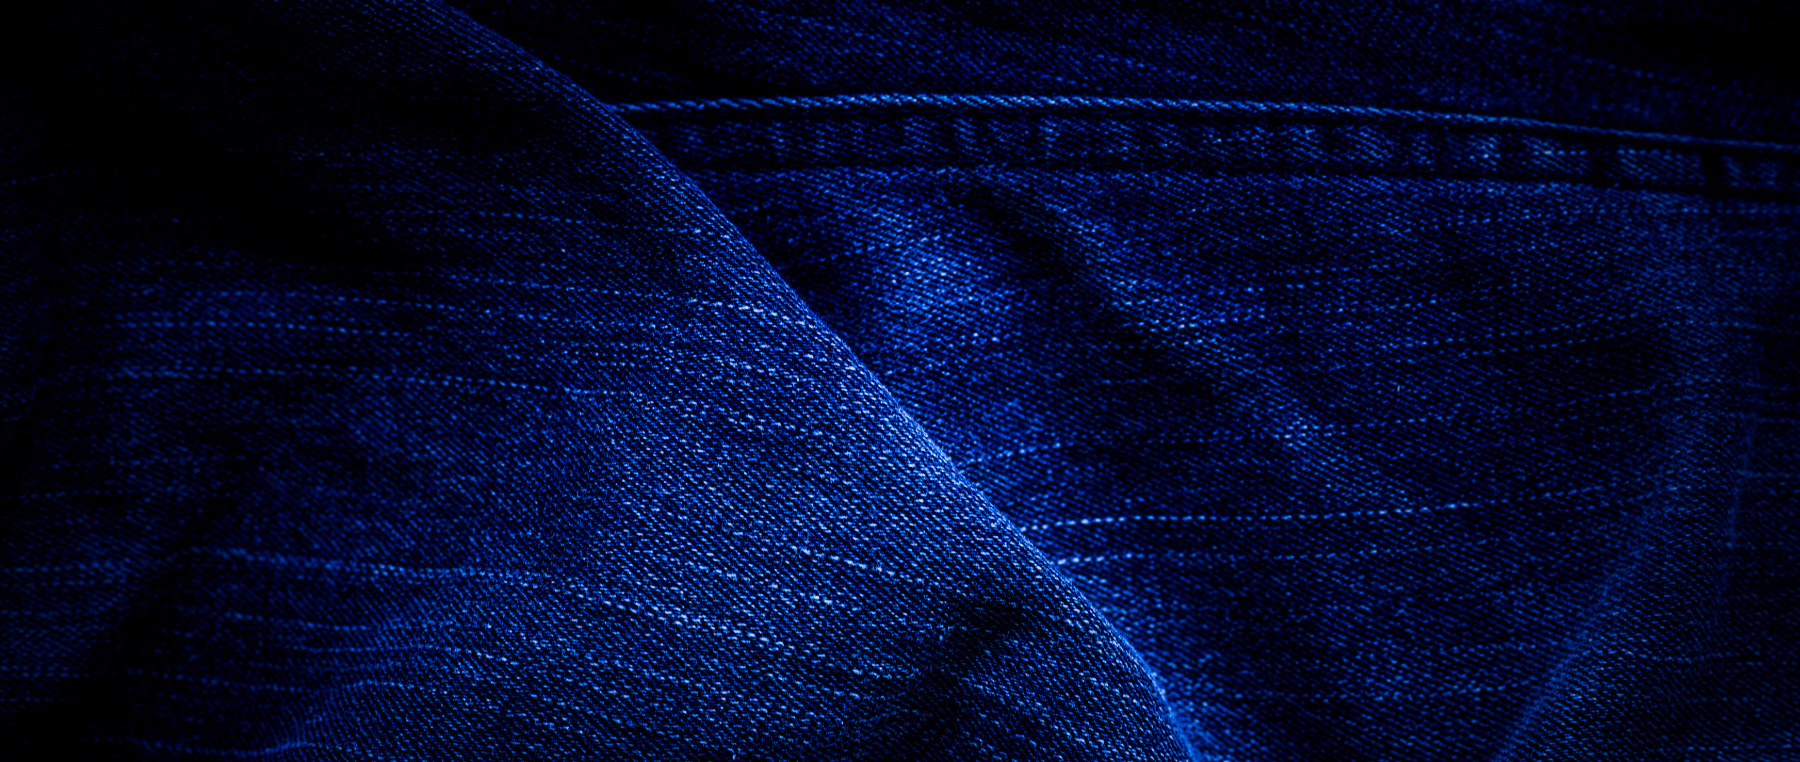 Can air change the dynamics of denim?